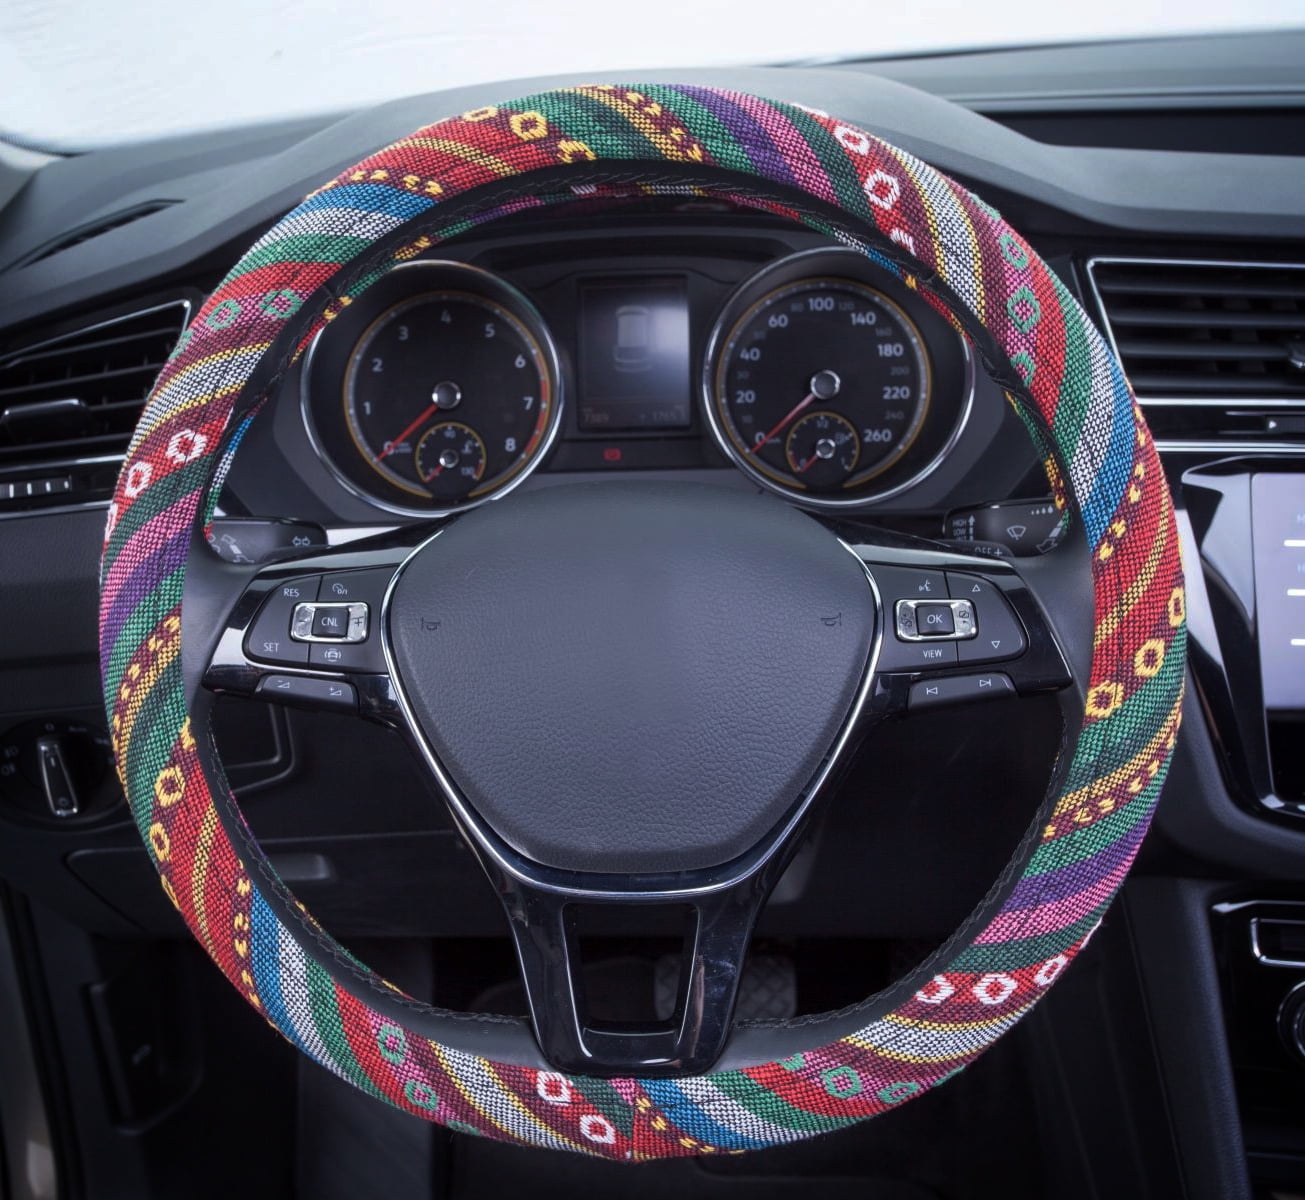  12PCS Car Accessories Set,Funny TV Show Merchandise,Car Seat  Cover,Steering Wheel Cover,Universal for Auto Truck Van SUV : Automotive